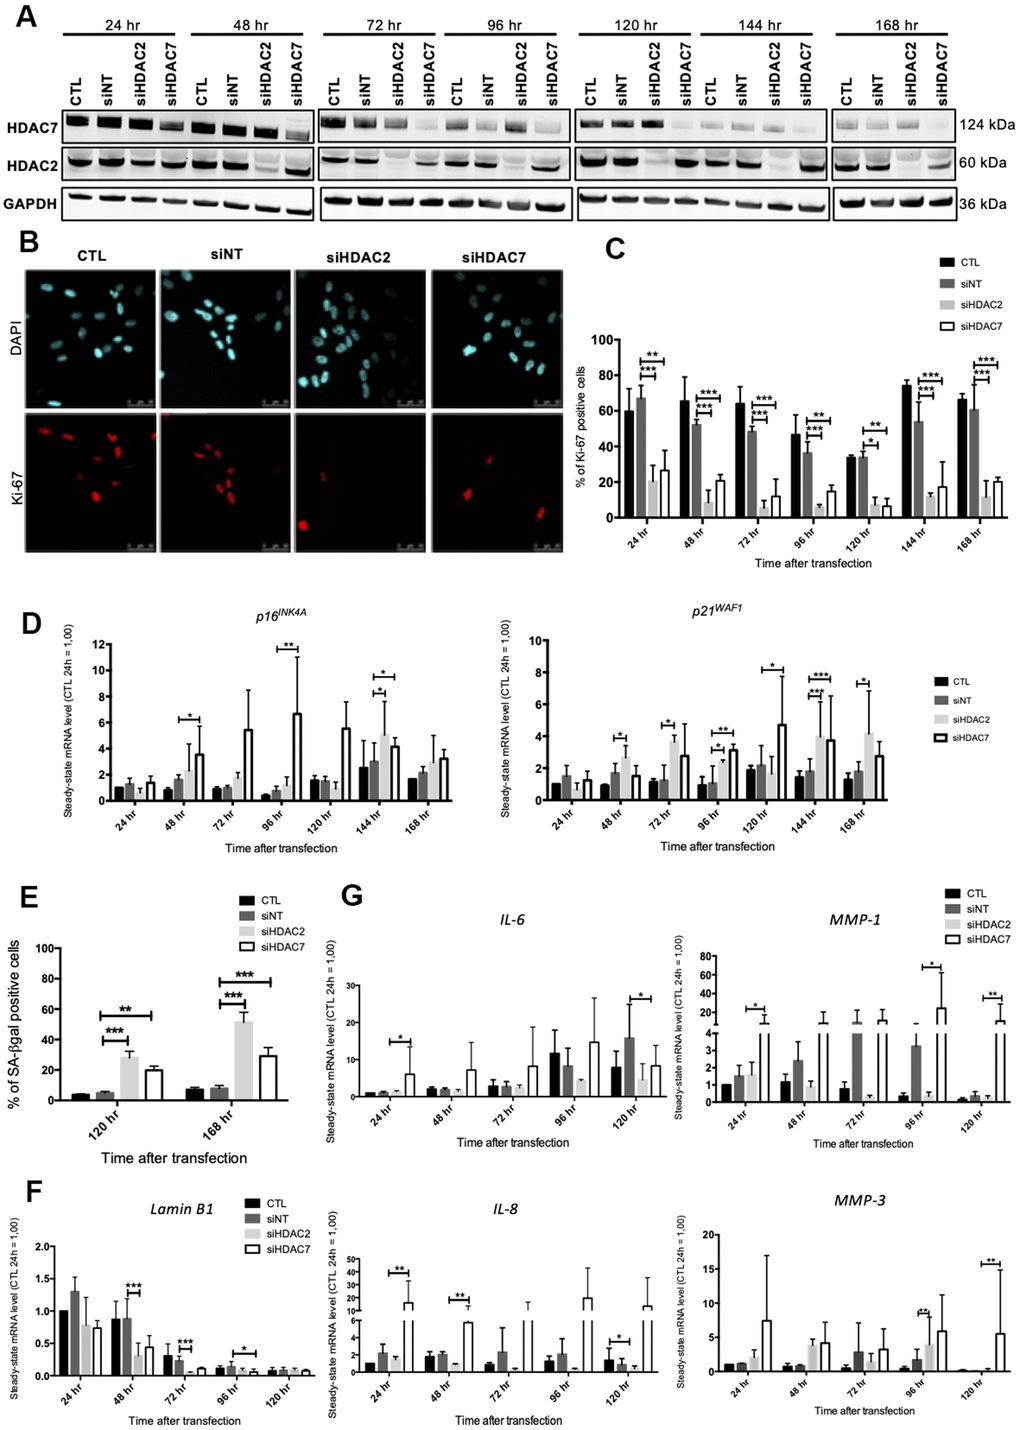 Knockdown of HDAC2 or HDAC7 induces senescence in AG04431 cells. Cells at early passage were transfected with control siRNA (non target, siNT), HDAC2 siRNA (siHDAC2) or HDAC7 siRNA (siHDAC7) during 24 hr and biomarkers of senescence were analysed every day during 7 days. (A) Representative Western blots showing HDAC2 and HDAC7 total protein abundance at different times (24-168 hr) after siRNA transfection. GAPDH was used as loading control. (B) Representative confocal images of cells labelled with Ki-67 staining (red) and DAPI (nucleus staining, blue) (scale bar = 50 μM). (C) Percentage of Ki-67-positive cells. (D) Steady-state mRNA level of p16INK-4a and p21WAF-1. GAPDH was used as a housekeeping gene. Results are expressed as fold induction in comparison to control fibroblasts at 24 hr. (E) Percentage of SA-βgal positive cells. (F) Steady-state mRNA level of Lamin B1. GAPDH was used as a housekeeping gene. (G) Steady-state mRNA level of IL-6, IL-8, MMP-1 and MMP-3. GAPDH was used as housekeeping gene. Results are expressed as fold induction in comparison to control fibroblasts at 24 hr. Statistical analyses were performed using an ANOVA II (*: p